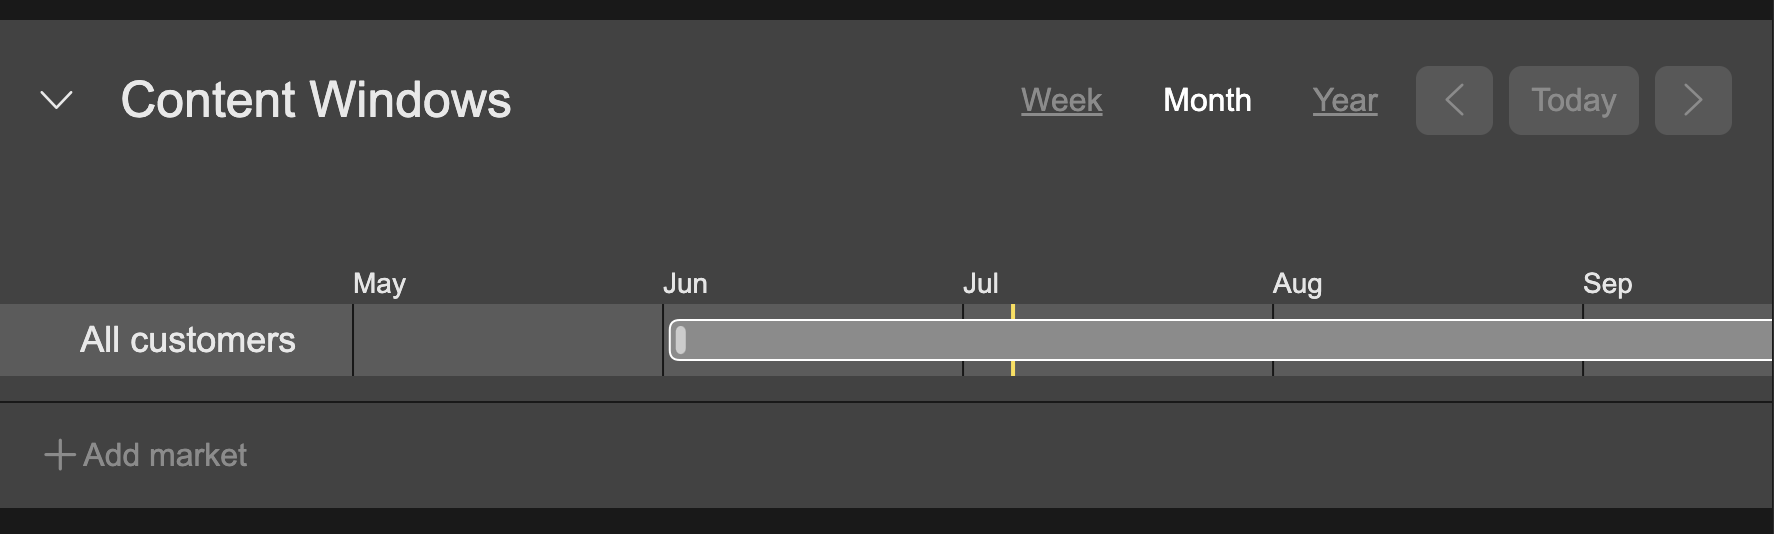 Use the left and right arrow or your trackpad/mouse-scroller to scroll along the timeline